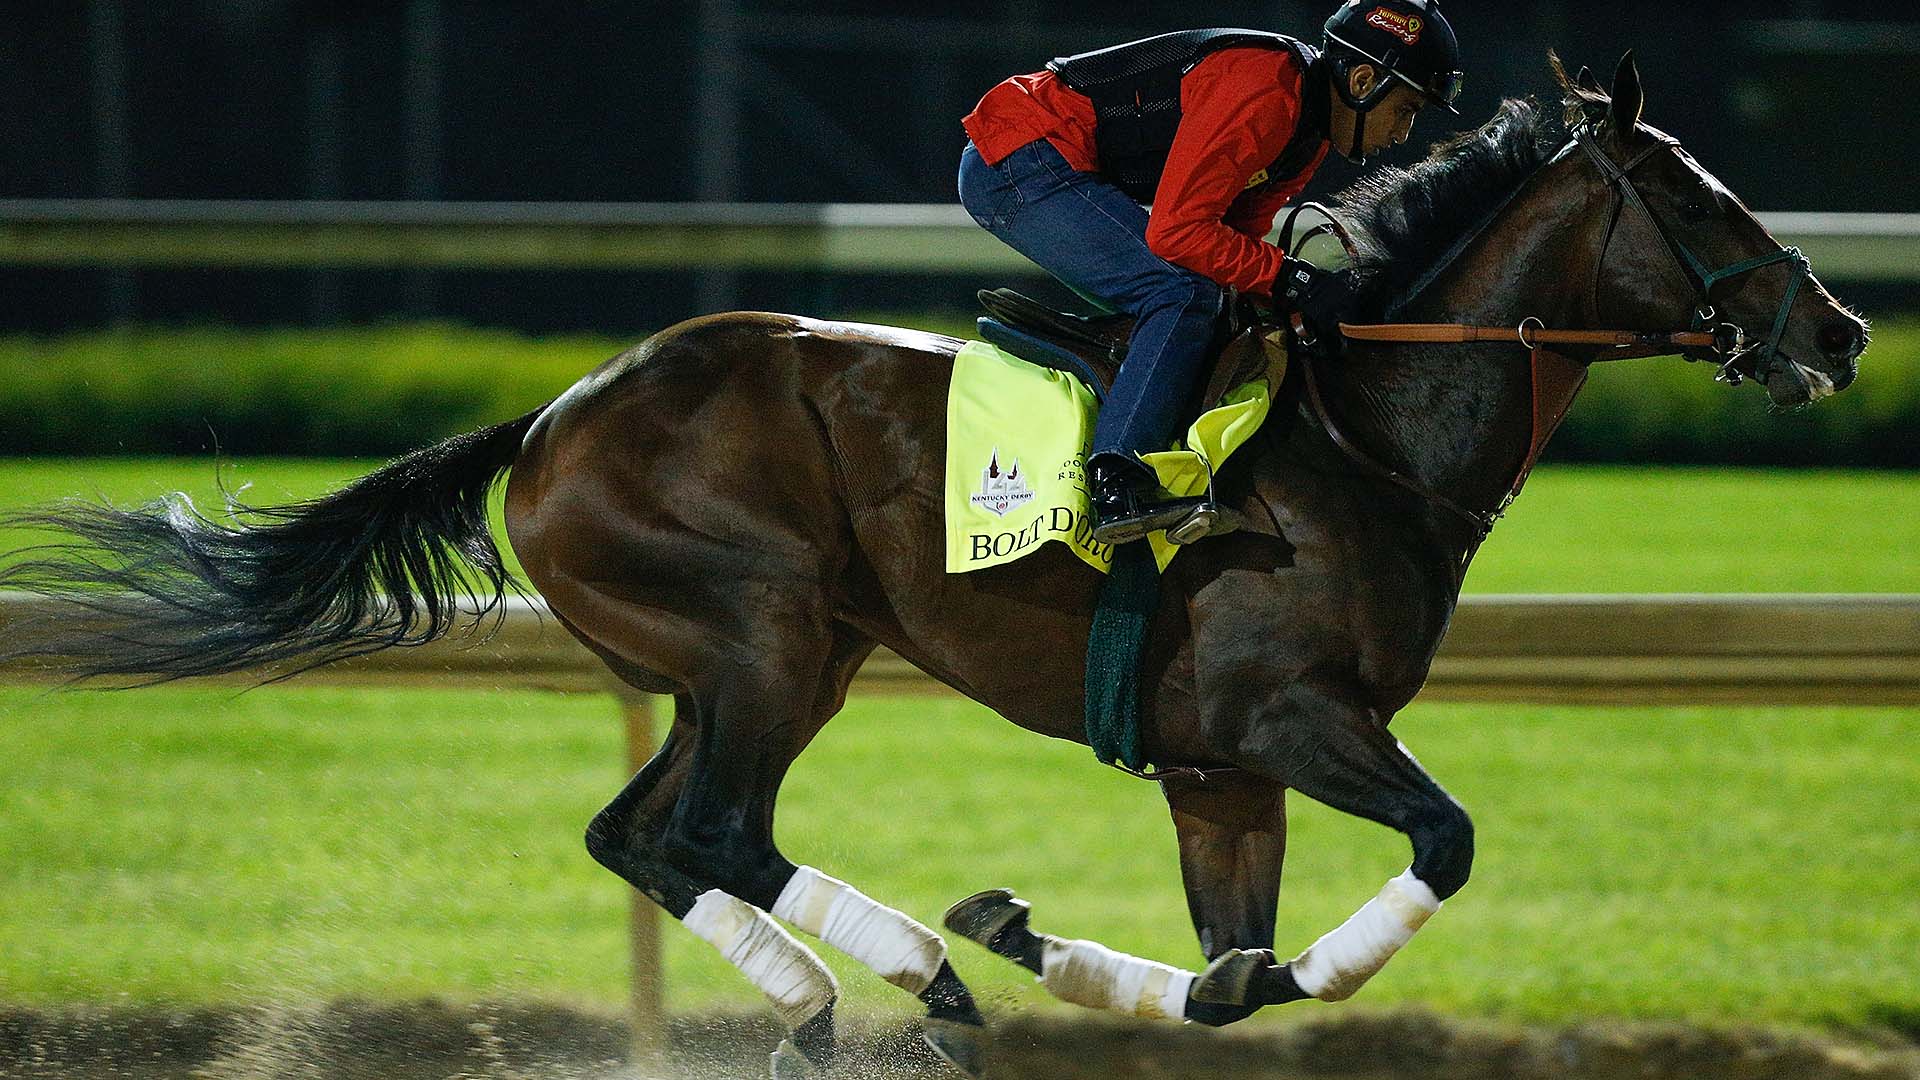 Kentucky Derby: Workout videos of horses in the lineup